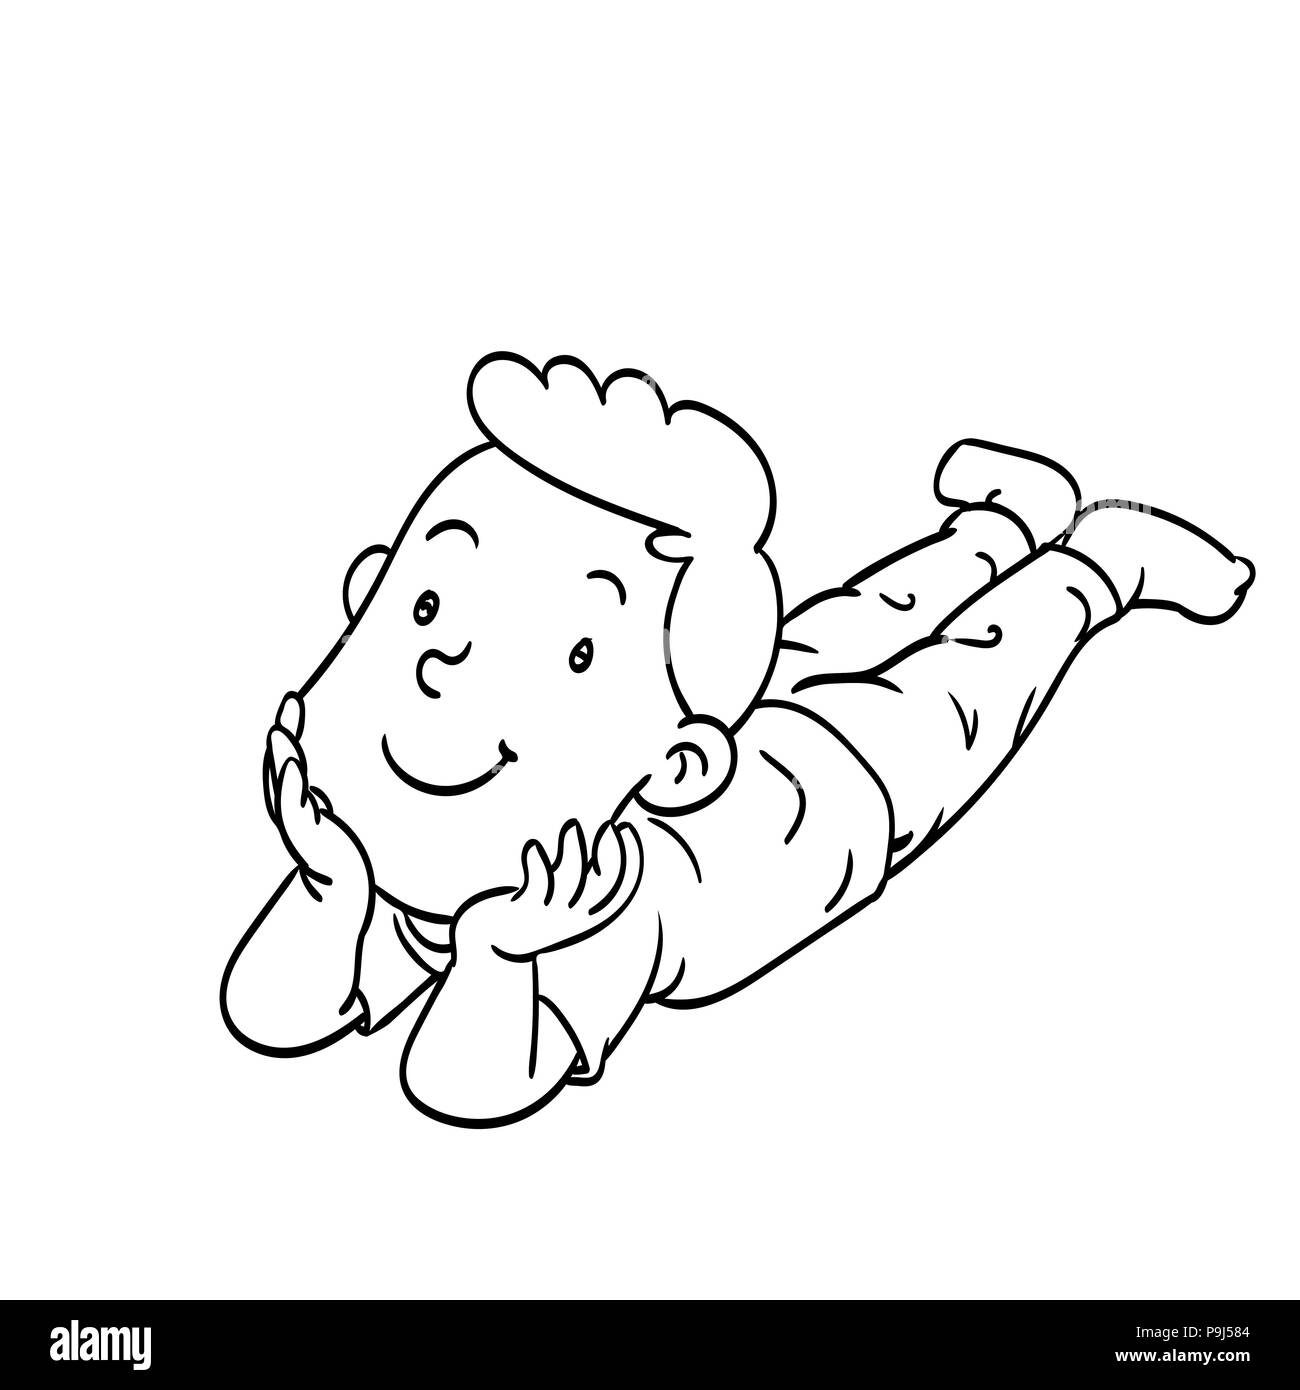 Hand drawn of a laying boy. Coloring book  educational for kids,  Coloring Cartoon Illustration. Stock Vector